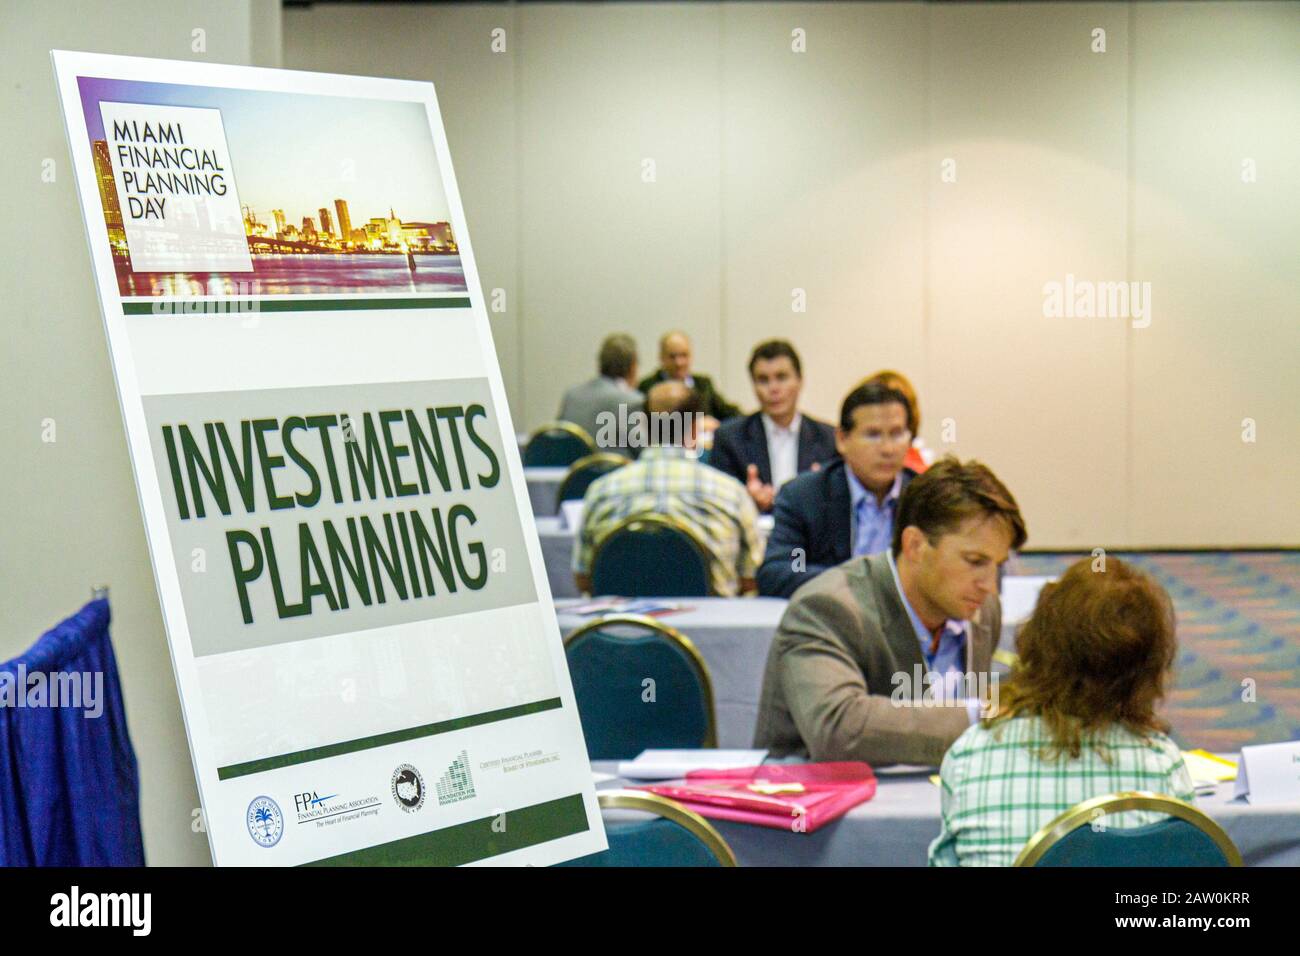 Miami Florida,James L. Knight Convention Center,Miami Financial Planning Day,free advice,guidanceal planners,sign,investment planning,FL101002045 Stock Photo